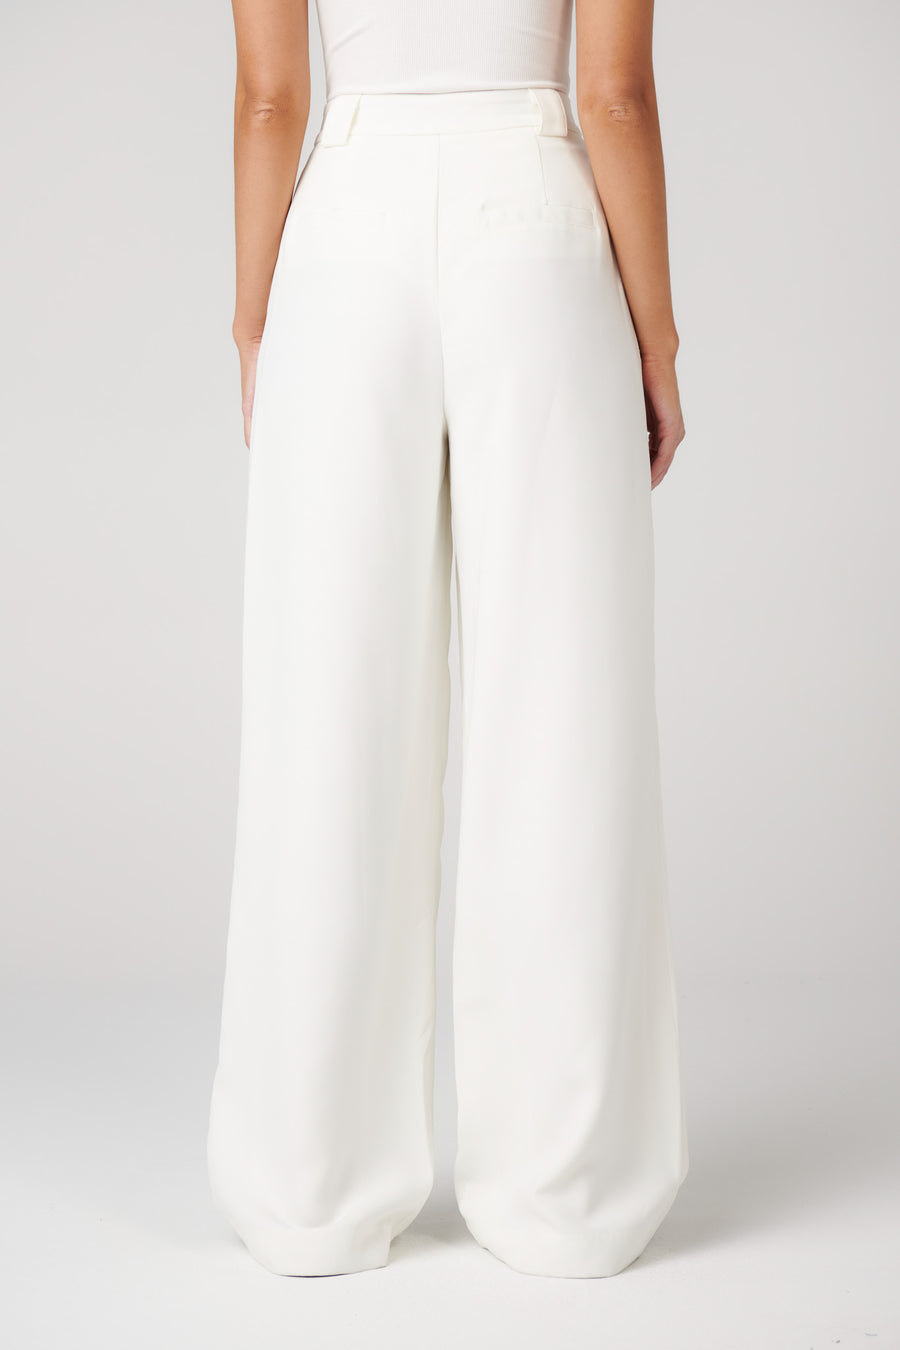 ROSSI PANT - WHITE